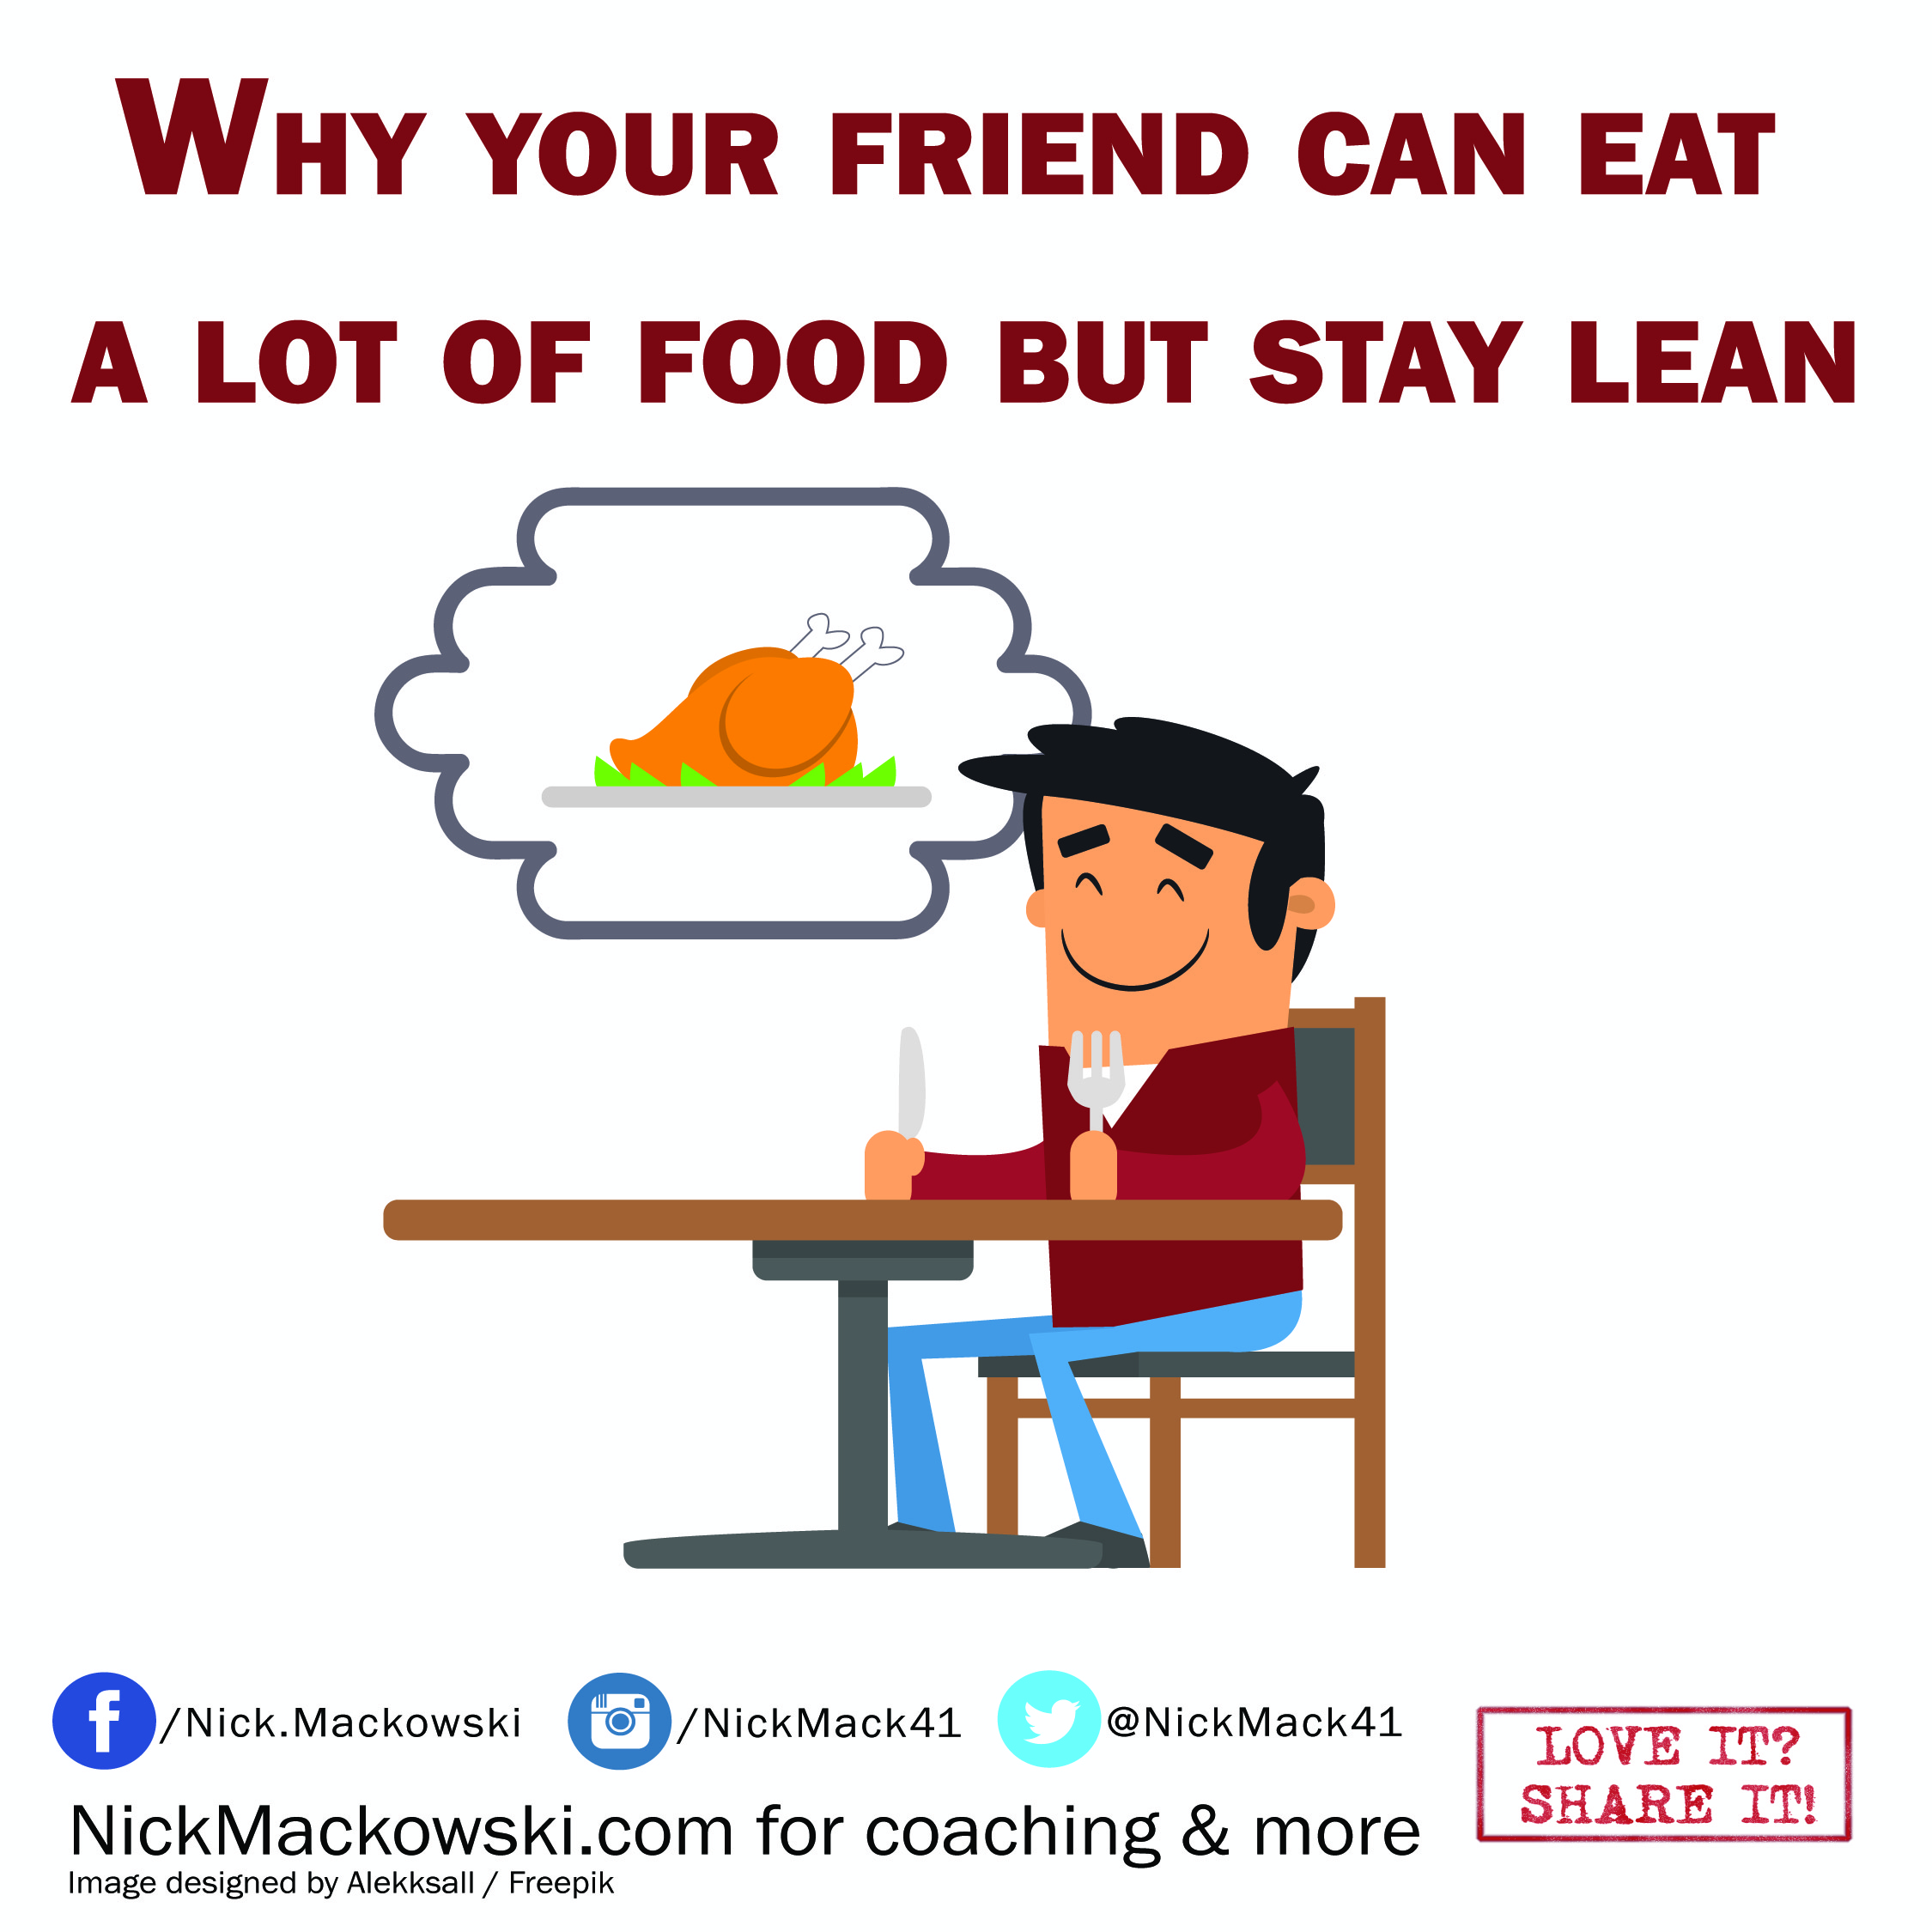 Why your friend can eat a lot of food-01.jpg